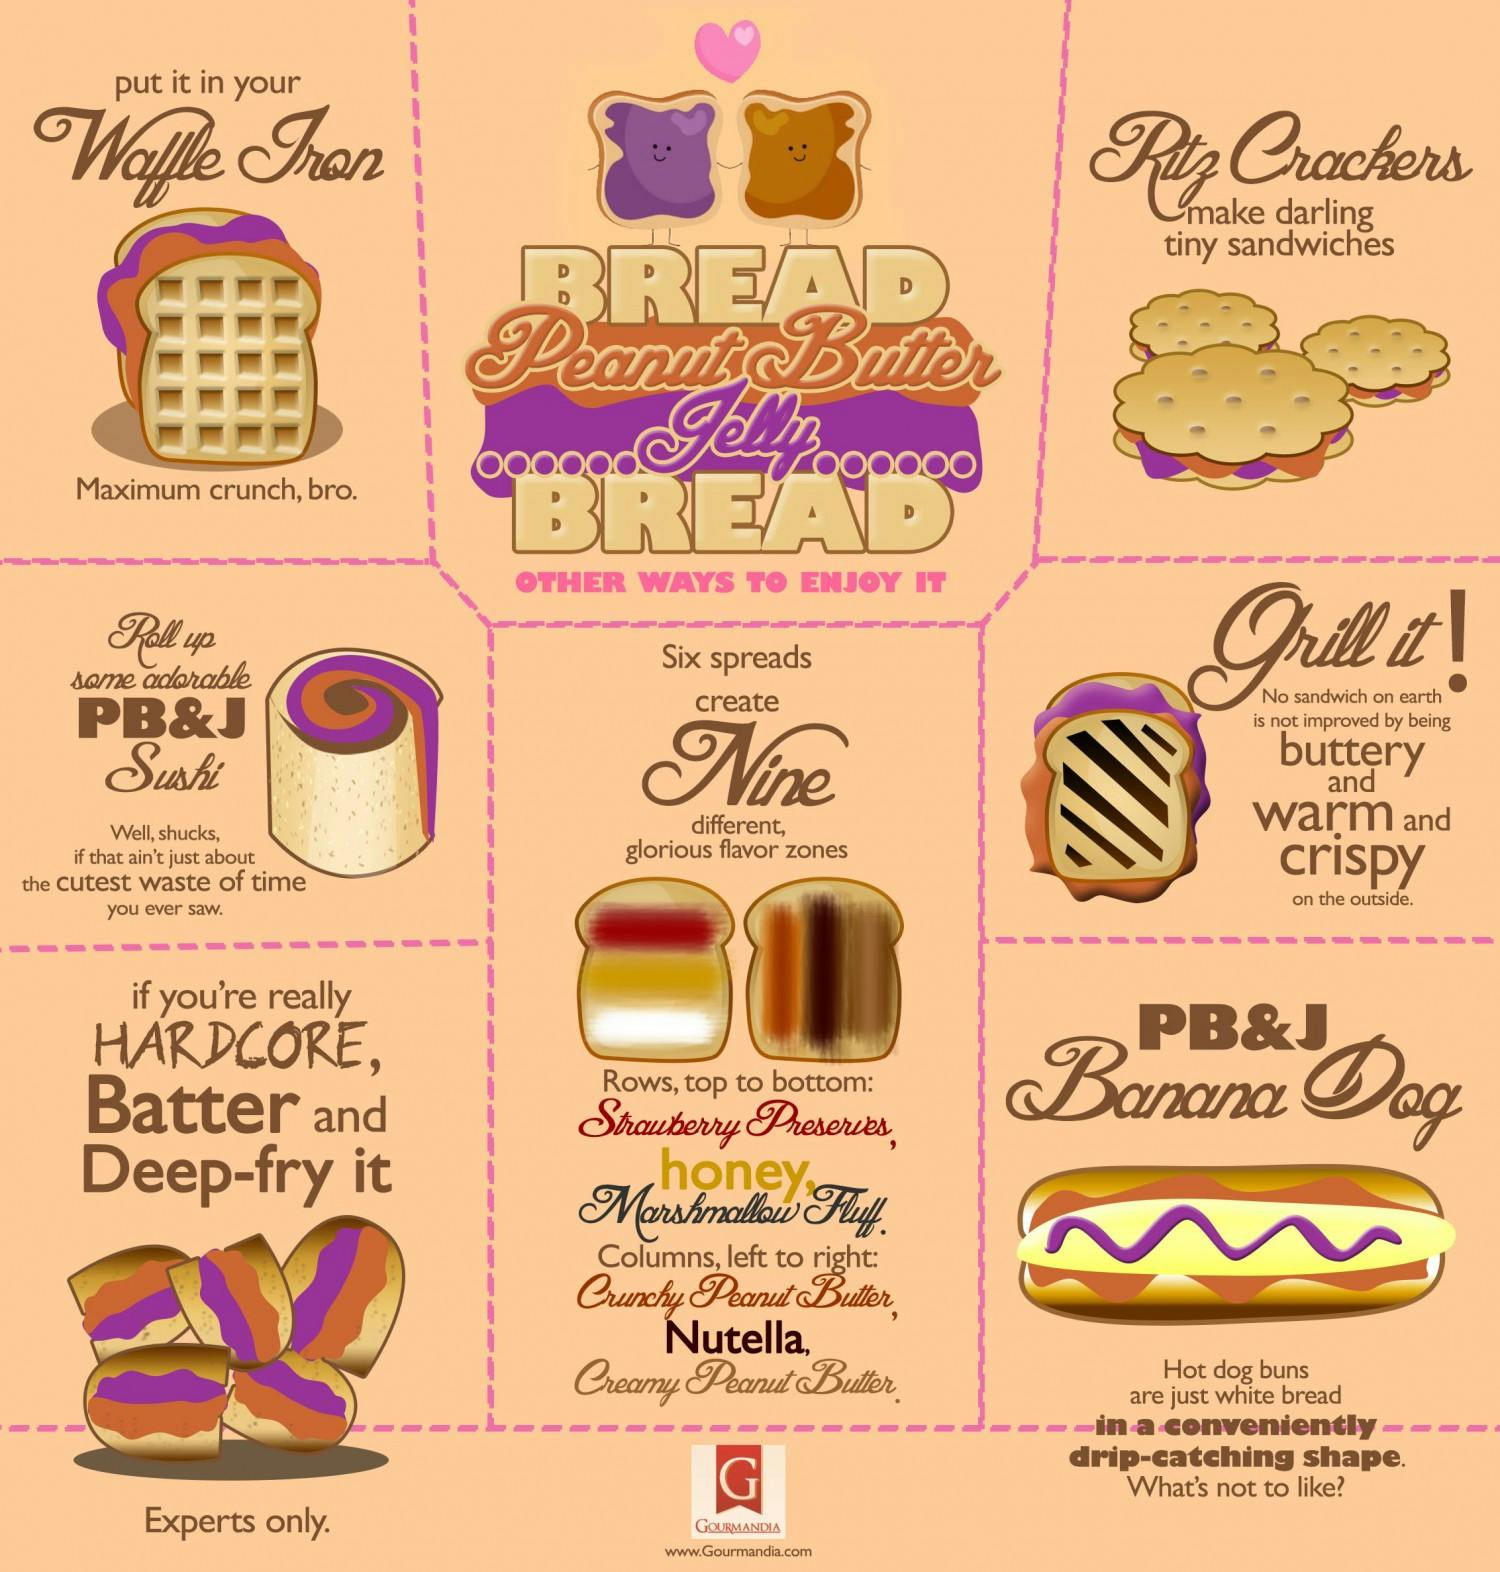 peanut-butter-and-jelly-other-ways-to-enjoy-it_5242cb3e60aec_w1500.jpg